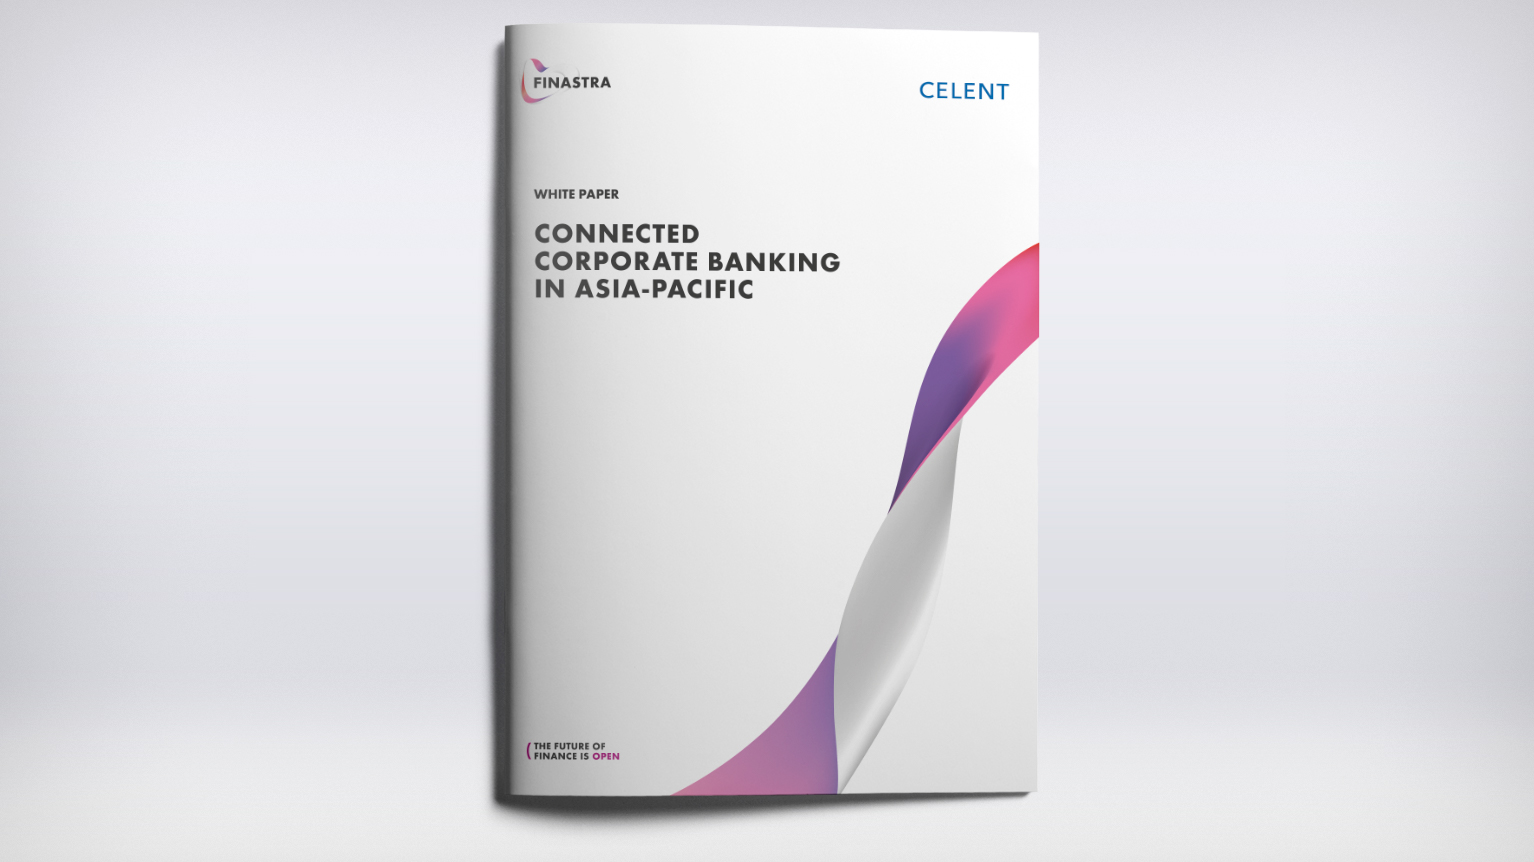 Thumbnail_Connected Corporate Banking in APAC_Celent_GL1348_FINAL.jpg